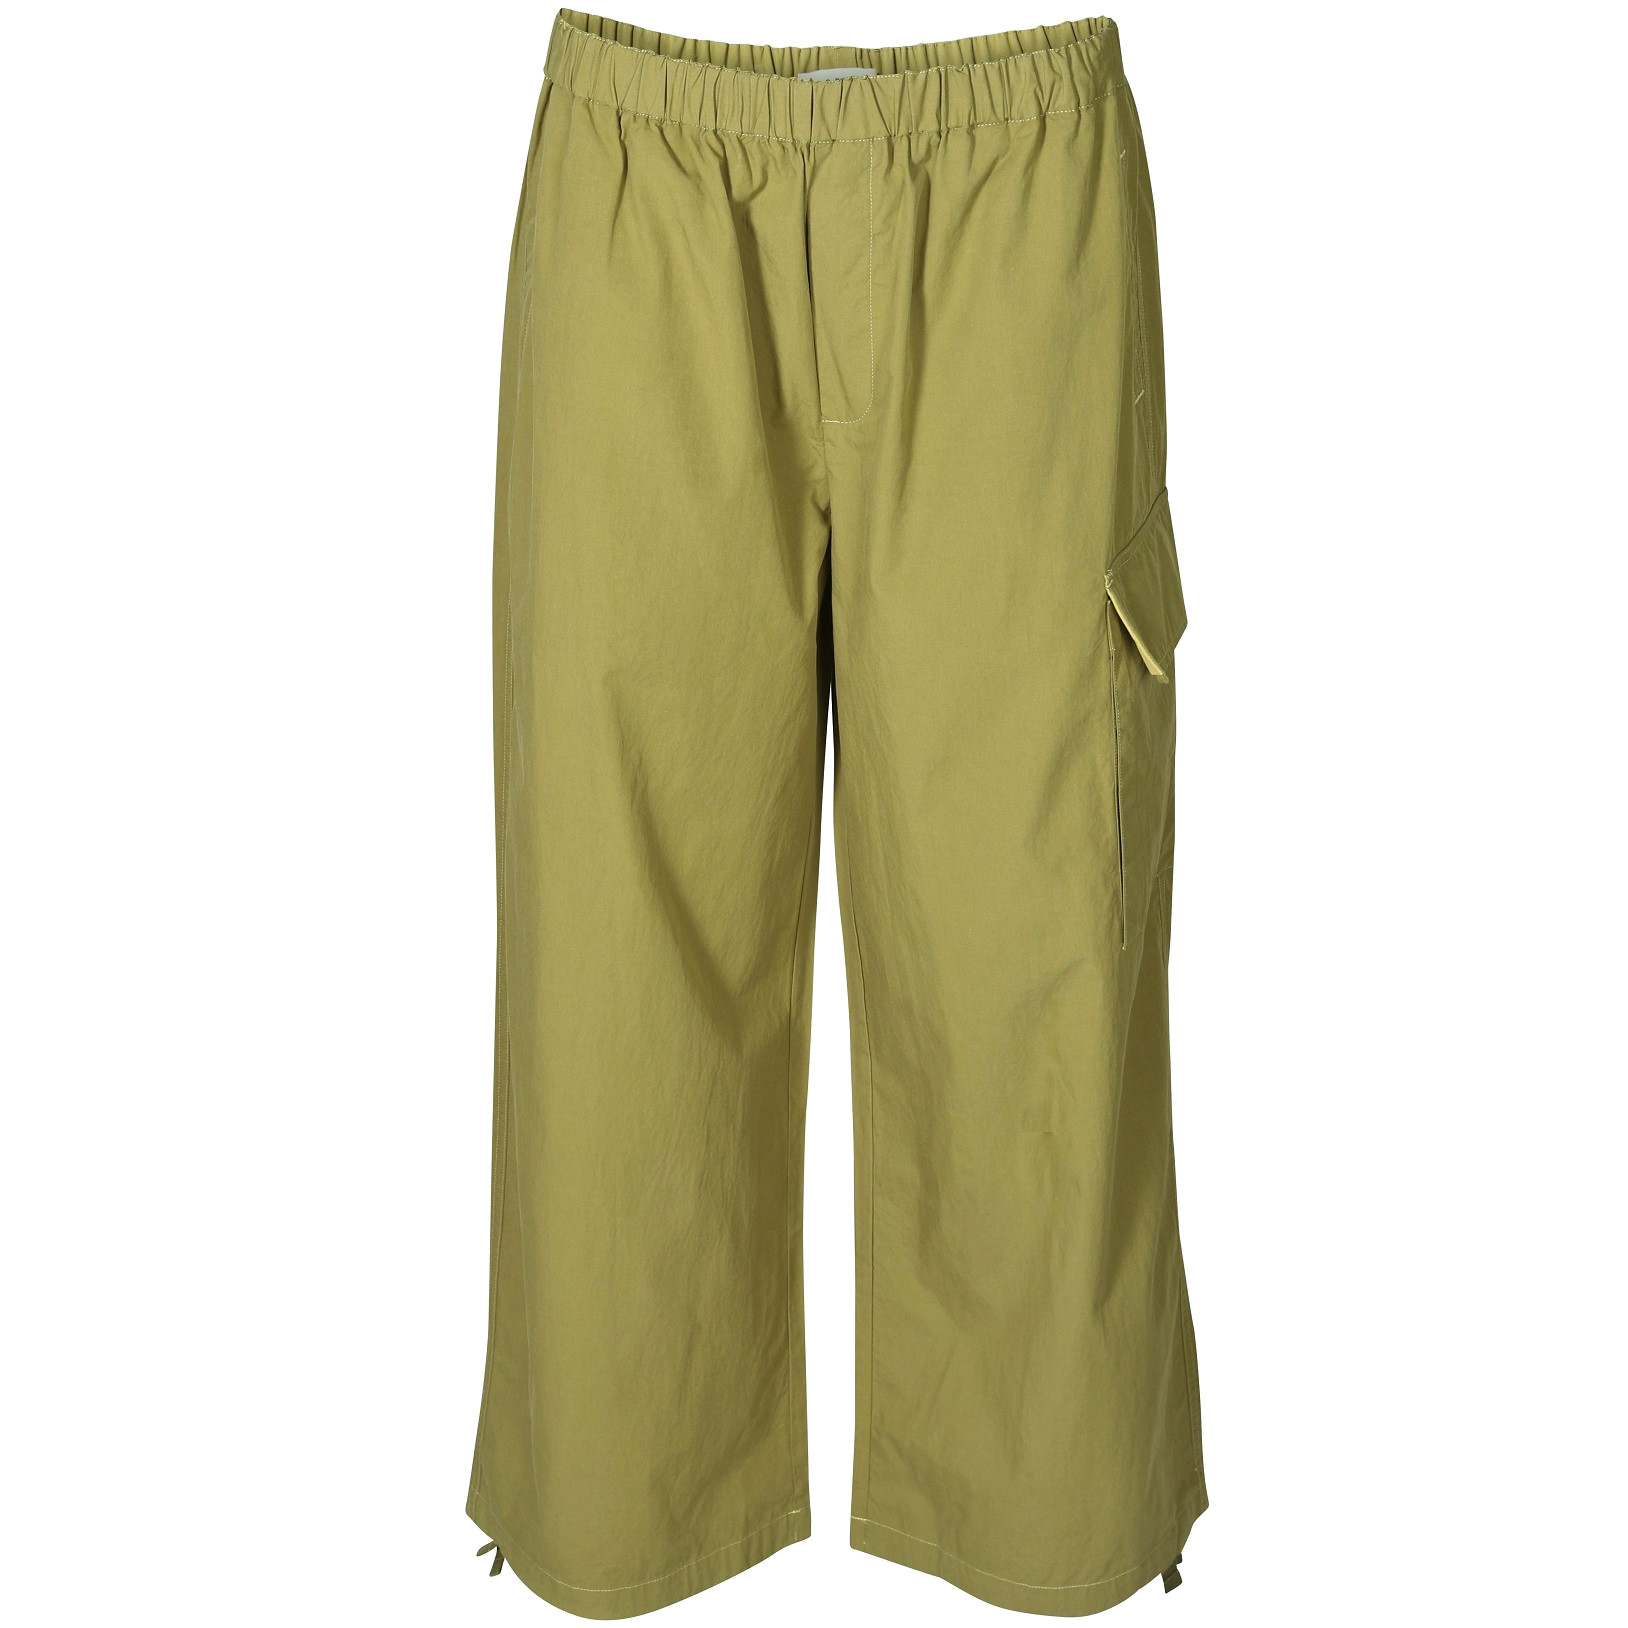 6397 Vacation Pant in Bright Army XS